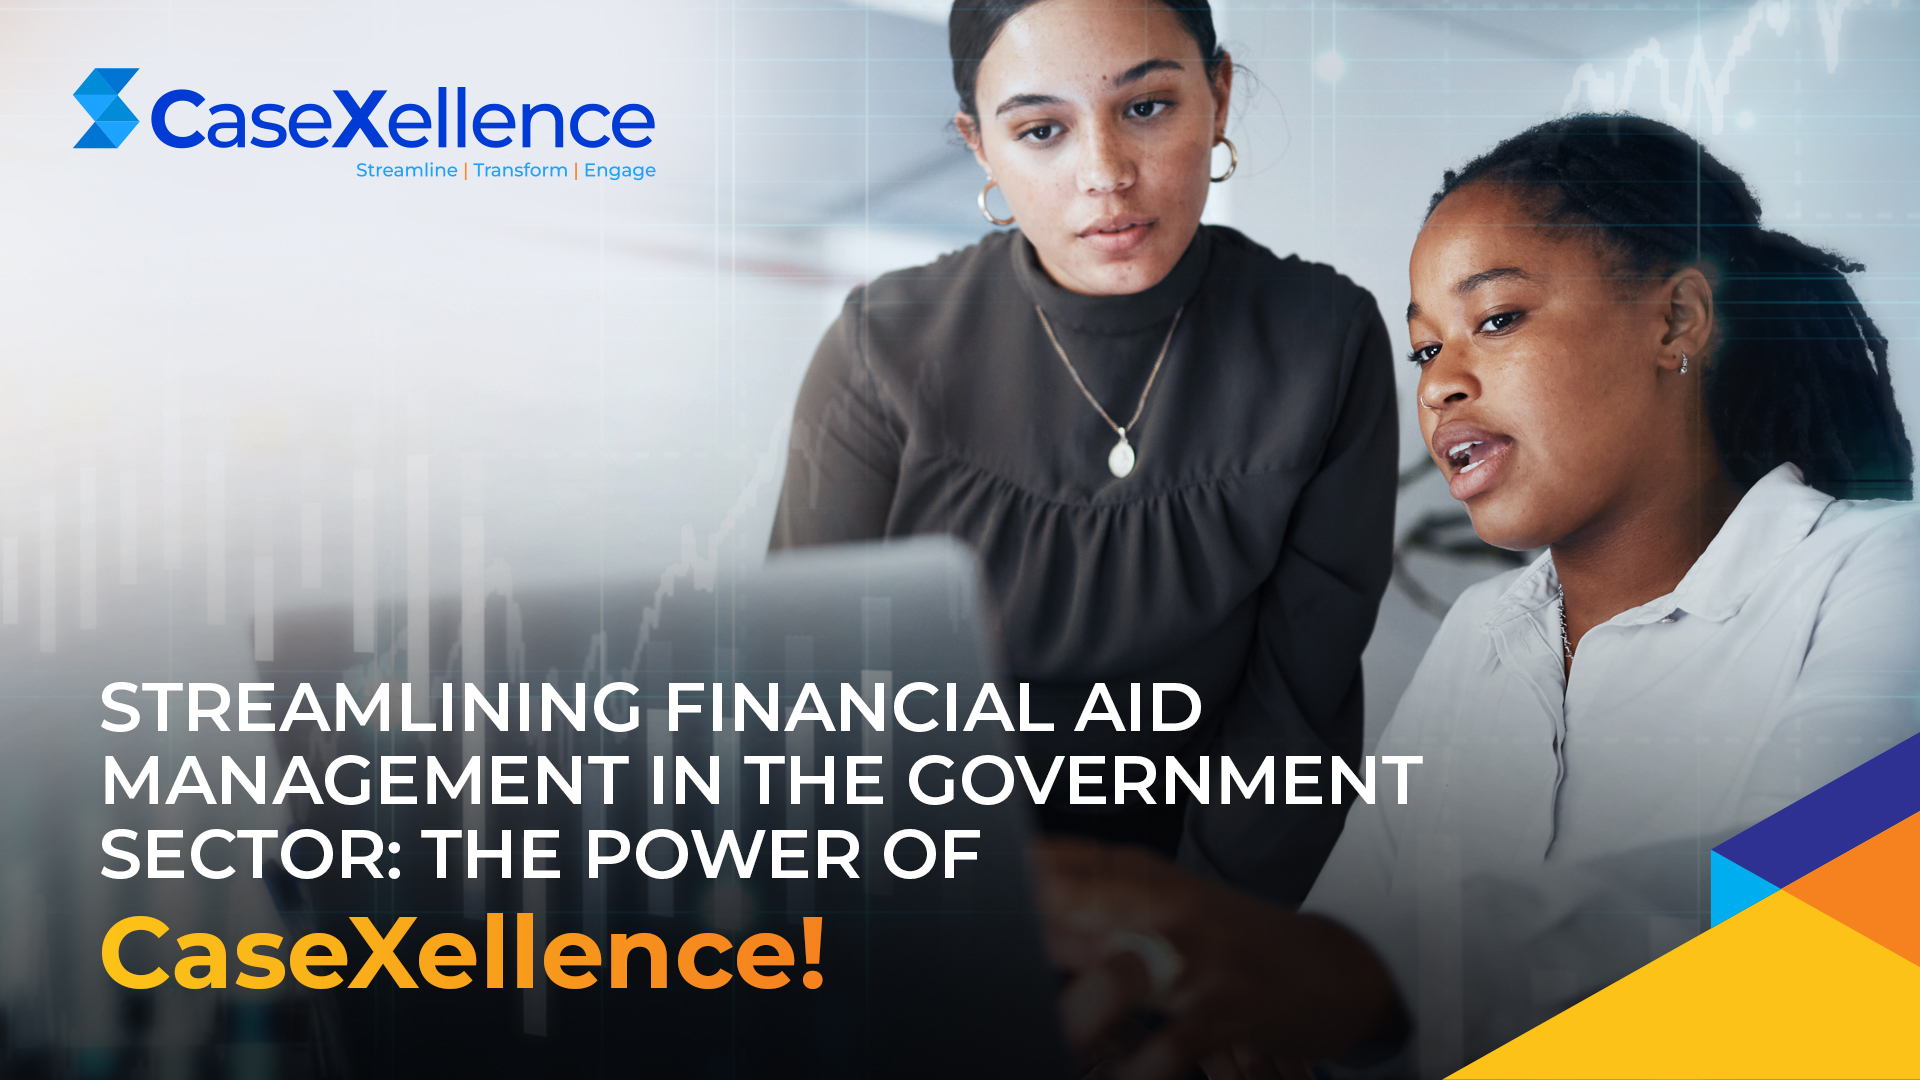 Streamlining Financial Aid Management in the Government Sector: The Power of CaseXellence 